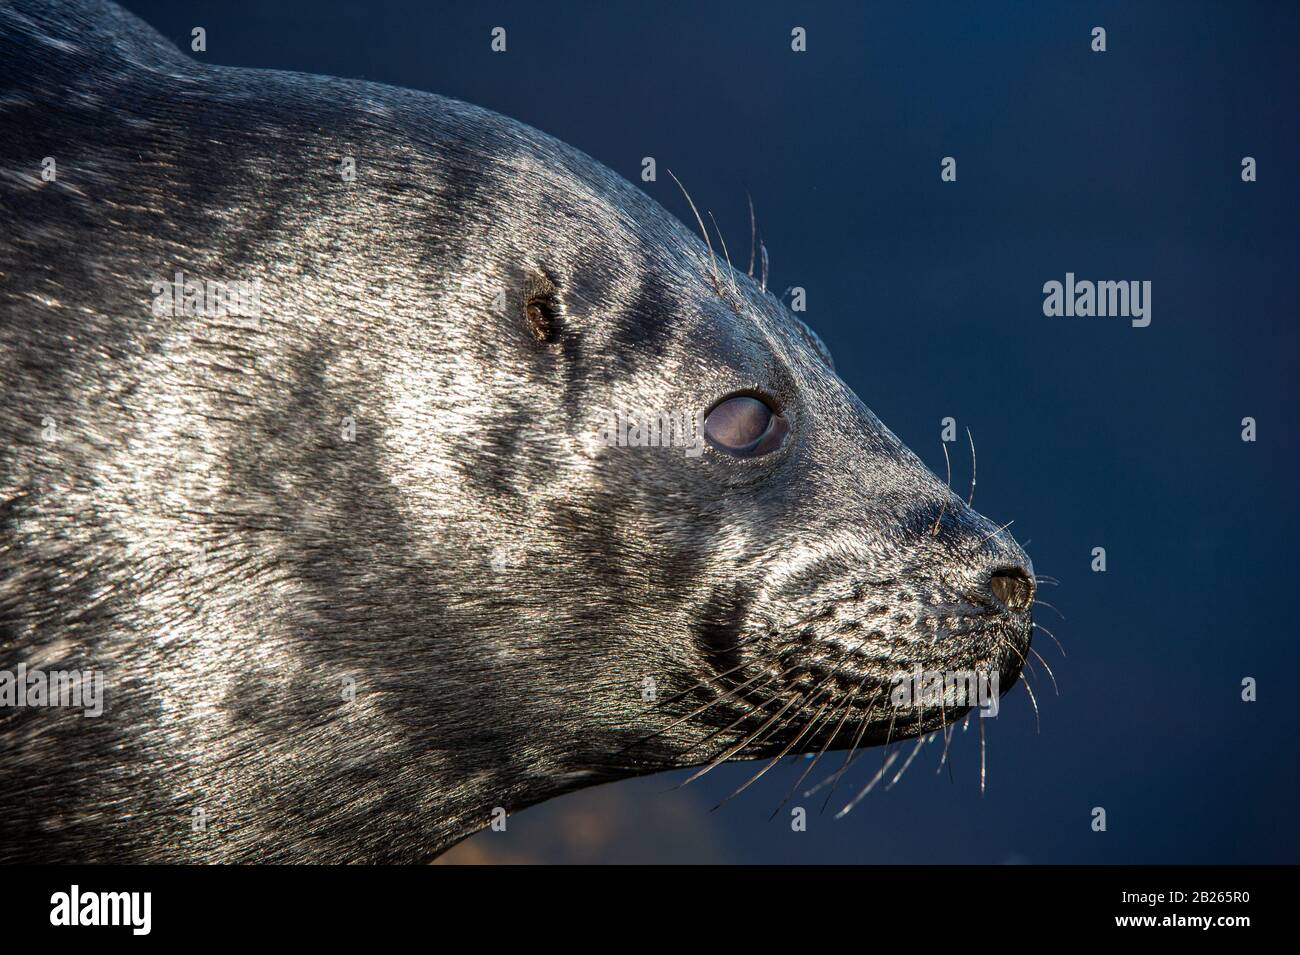 The Ladoga ringed seal resting on a stone. Close up portrait, side view. Scientific name: Pusa hispida ladogensis. The Ladoga seal in a natural habita Stock Photo